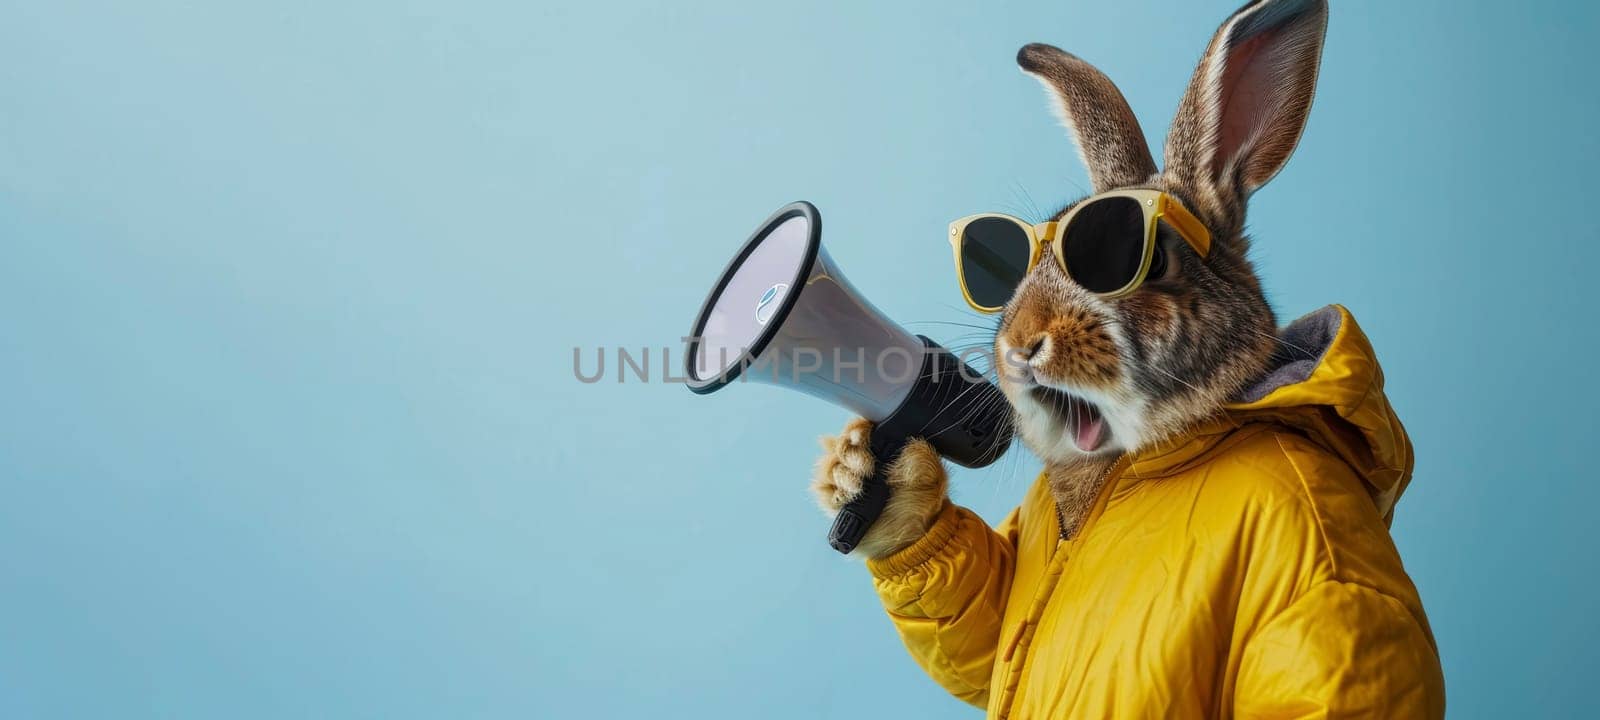 A stylish rabbit wearing sunglasses and a yellow jacket holding a megaphone against a blue background.